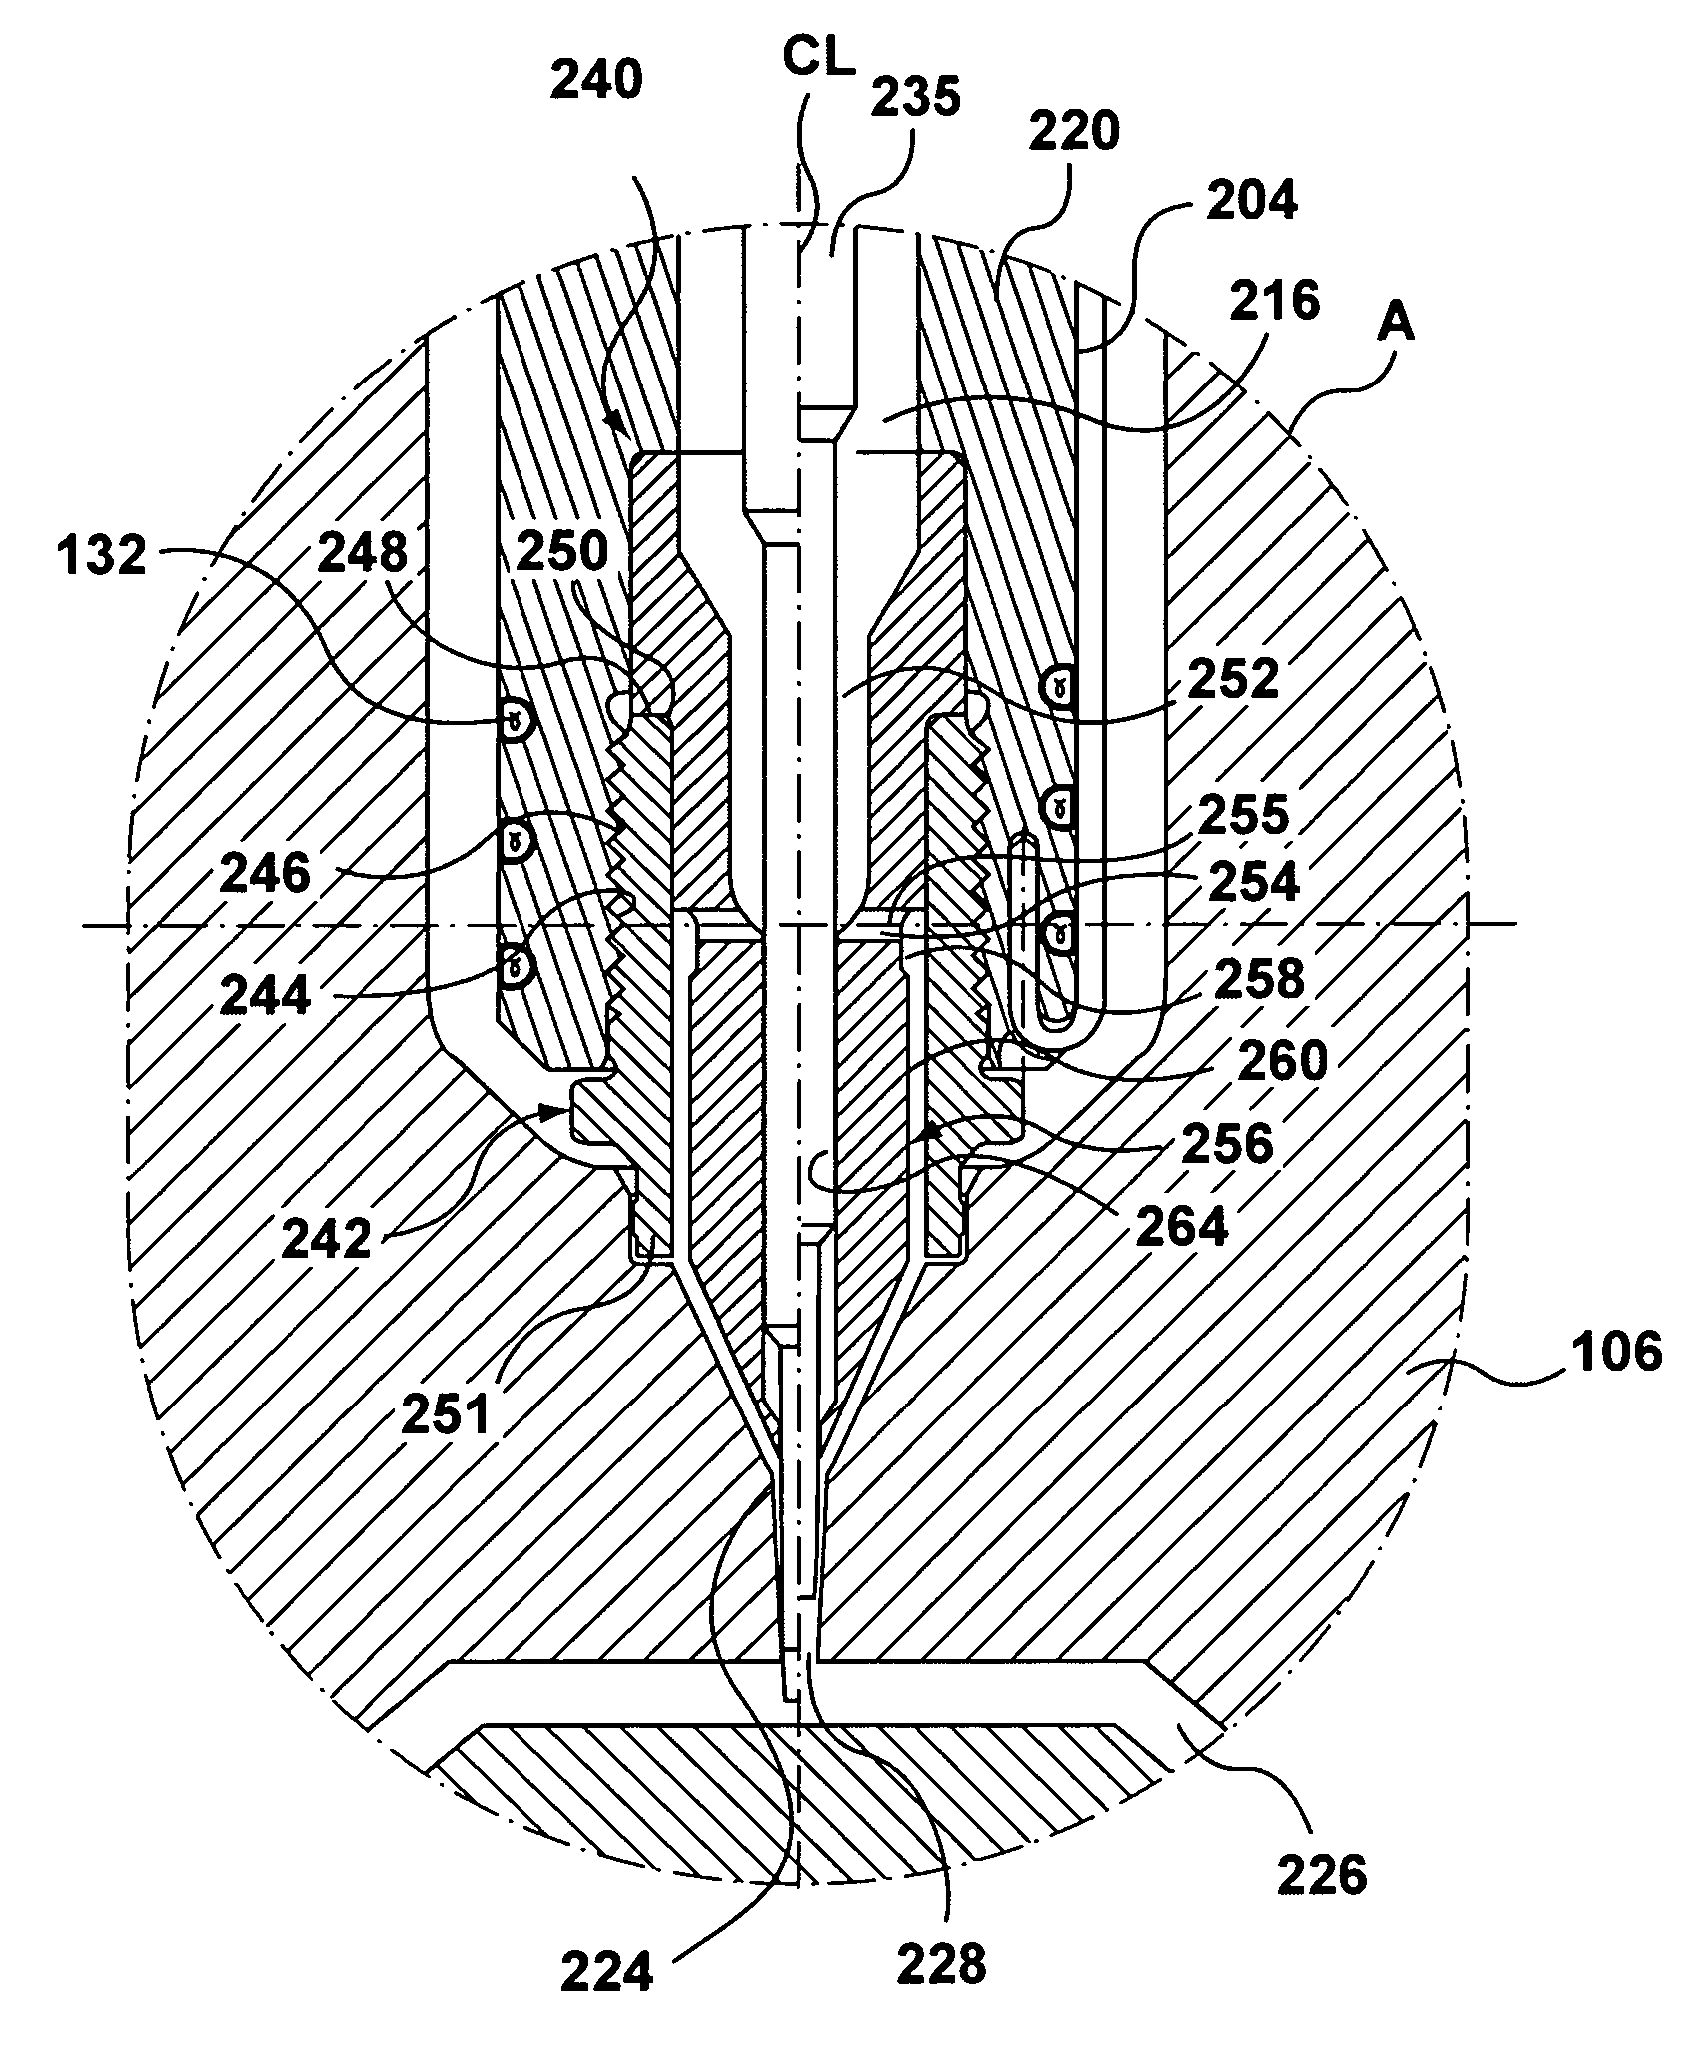 Valve-gated injection molding nozzle having an annular flow